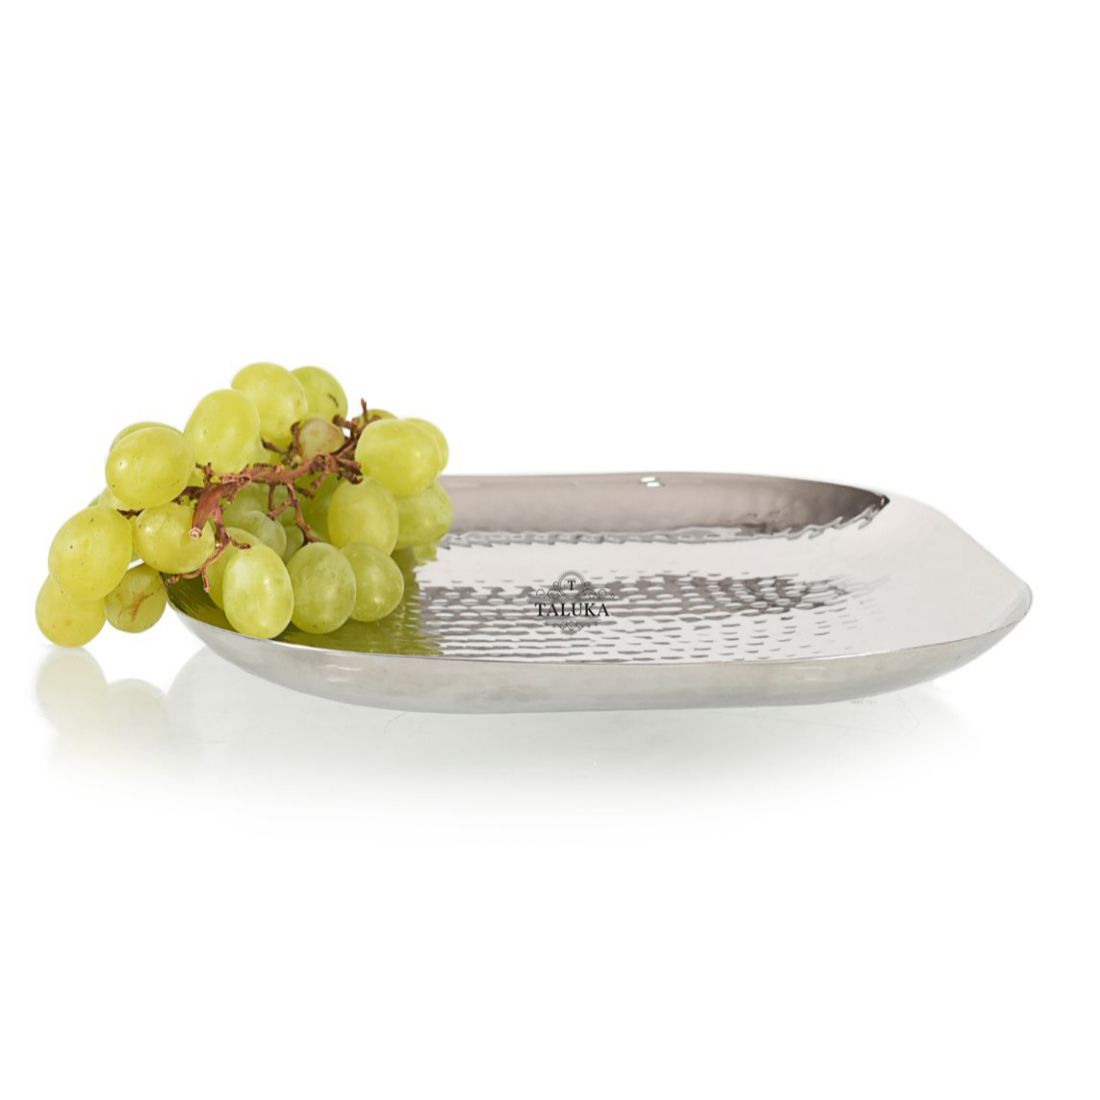 Premium Stainless Steel Hammered Royal Finishing Tray Best for Home | Kitchen | Hotel | Breakfast | Dry Fruits | Fruits